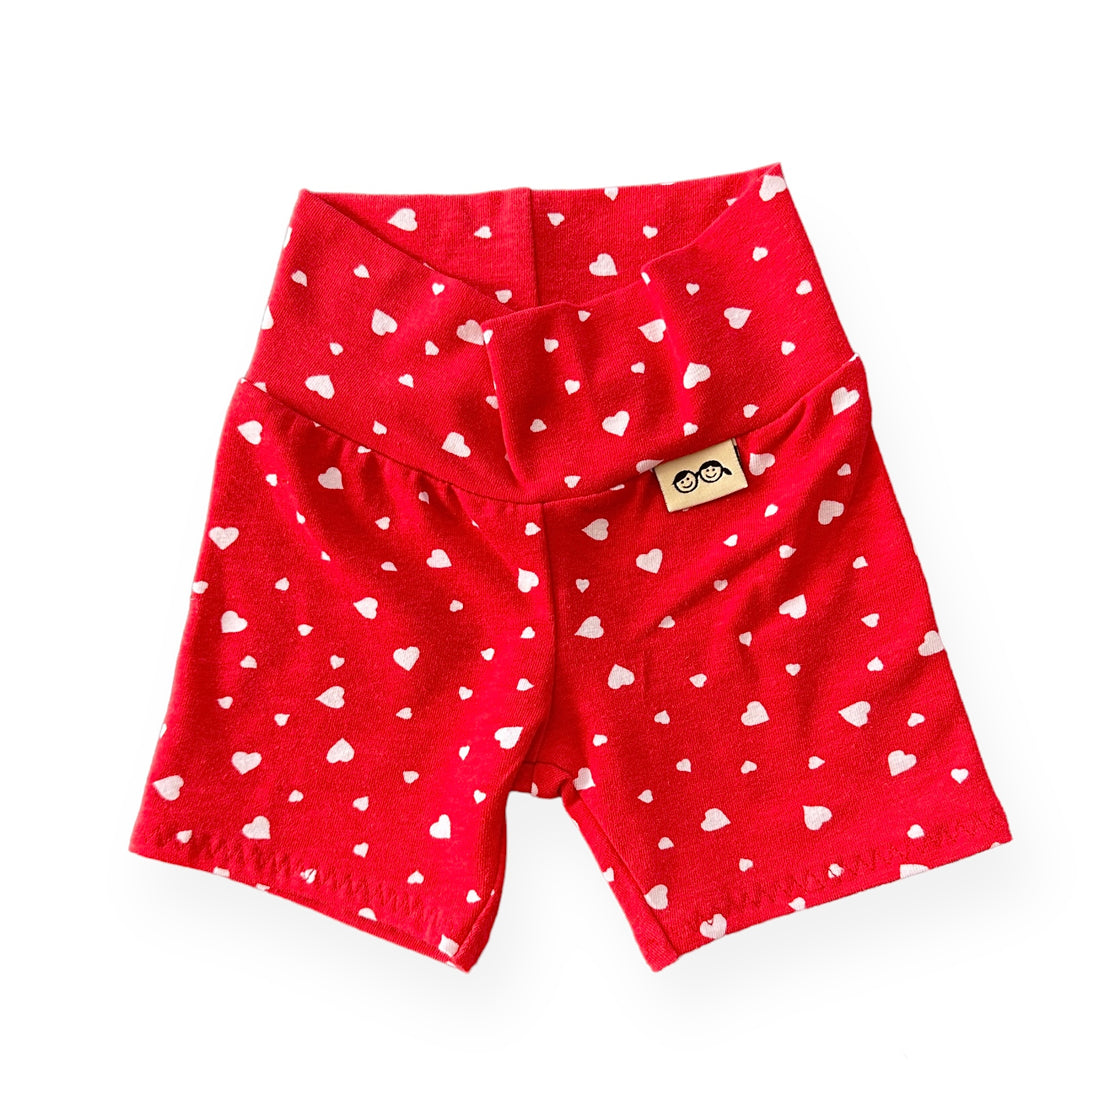 White Dainty Hearts on Red Biker Shorts 